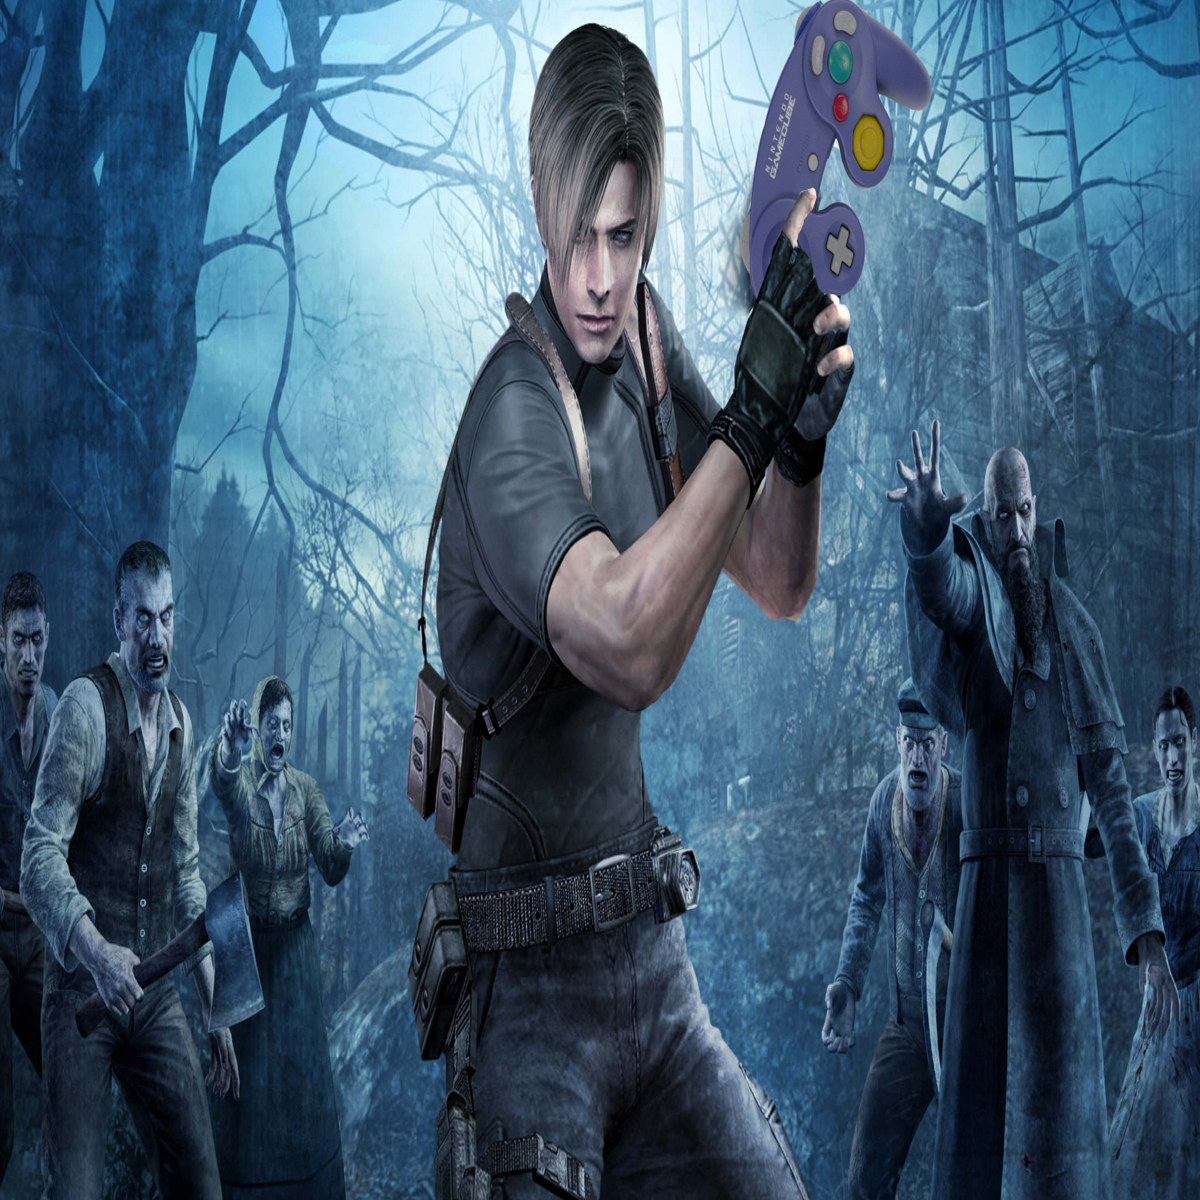 Resident Evil 4 DLC Separate Ways launches Sept 21, RE4 VR Mode